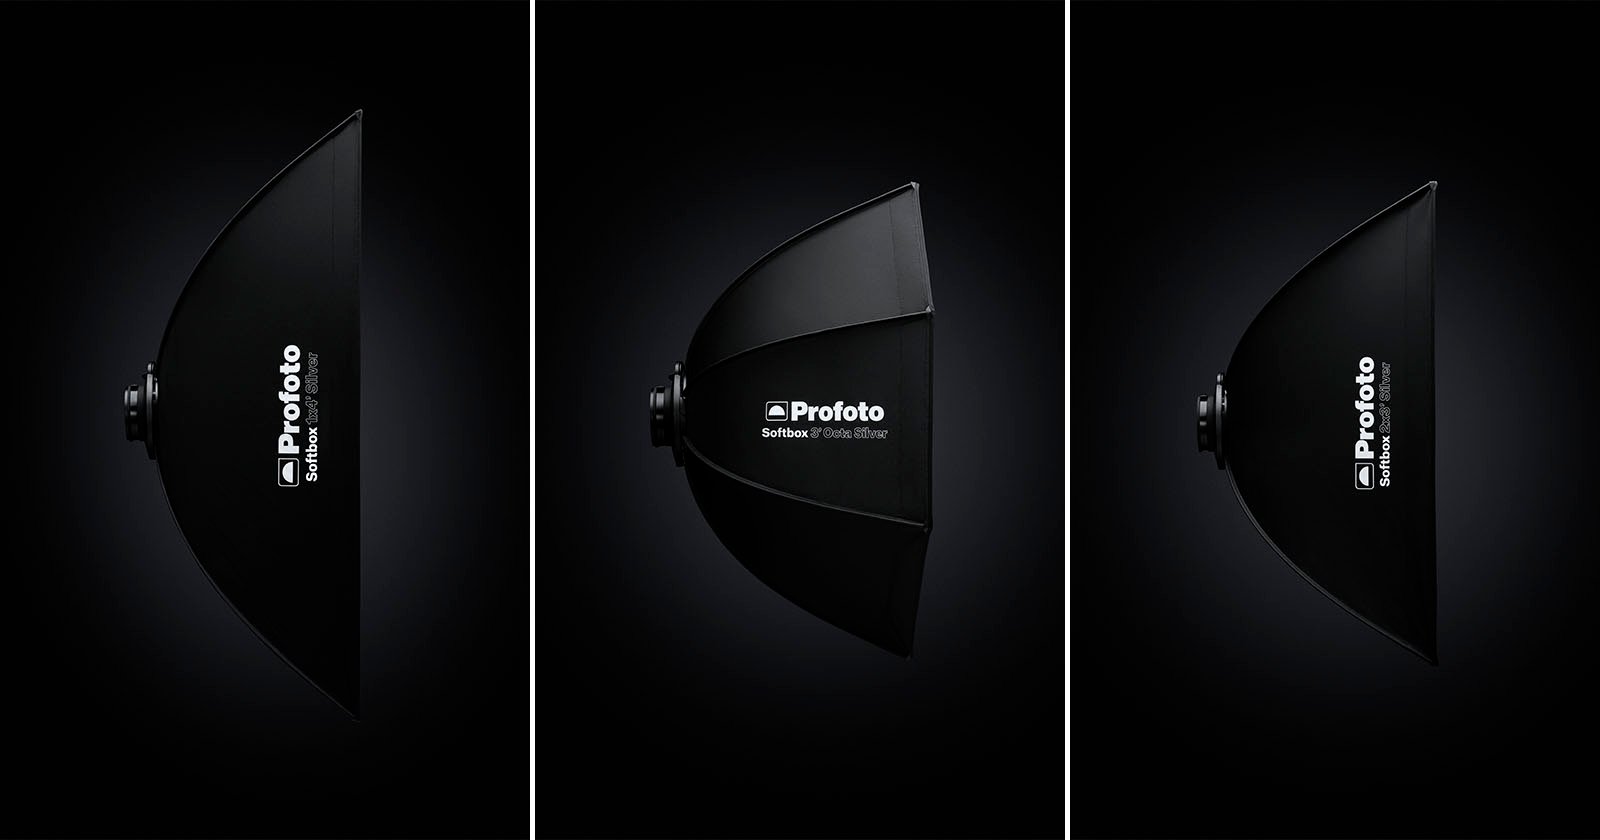 New Profoto Softboxes Create Soft and Controllable Light in Seconds